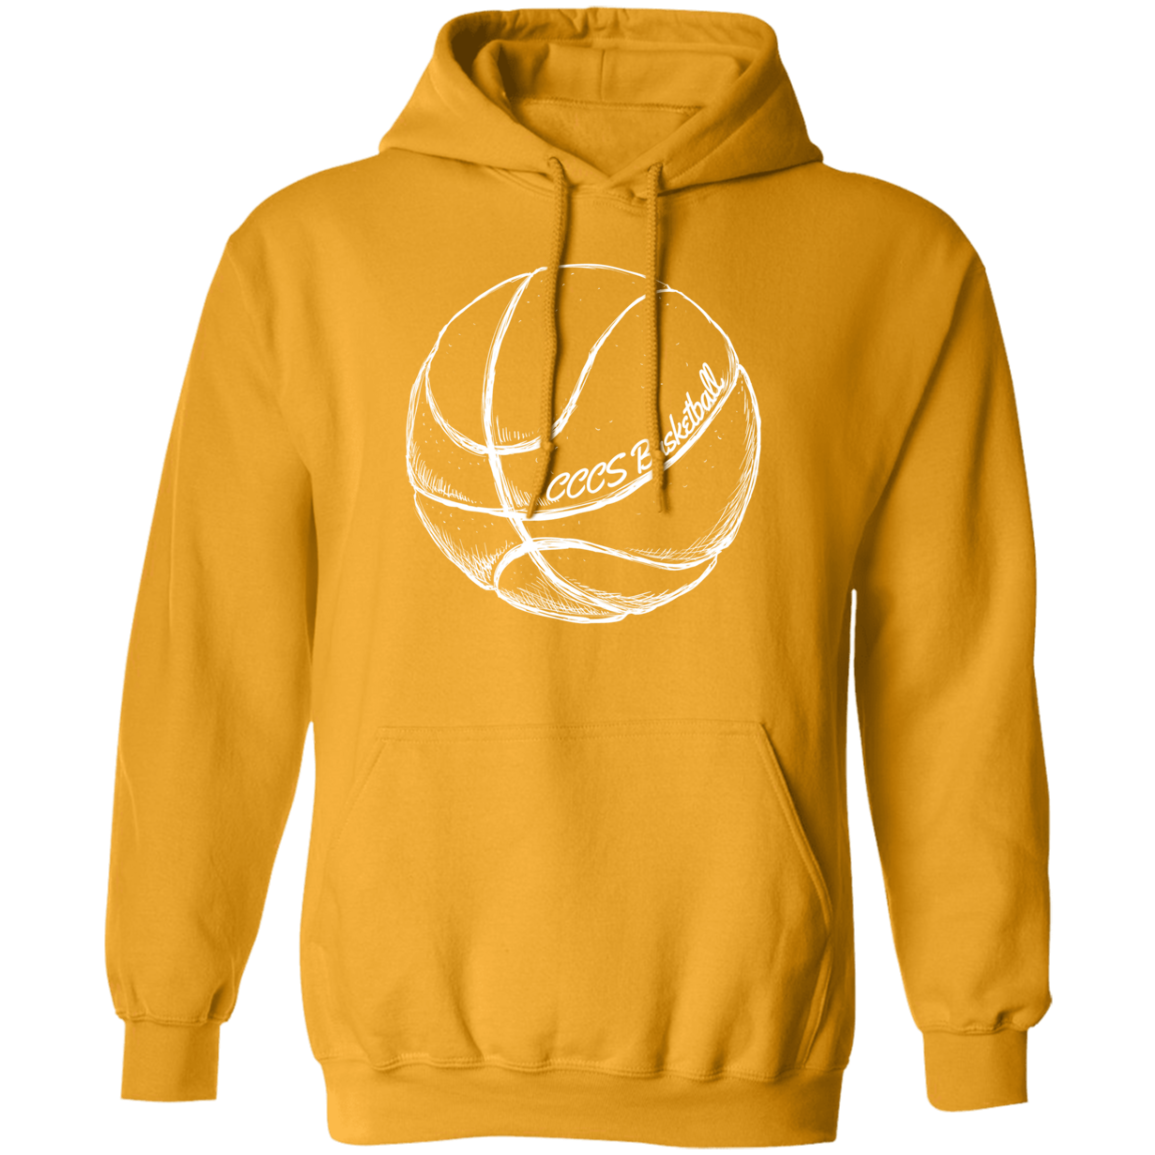 CCCS Basketball Adult Size Pullover Hoodie